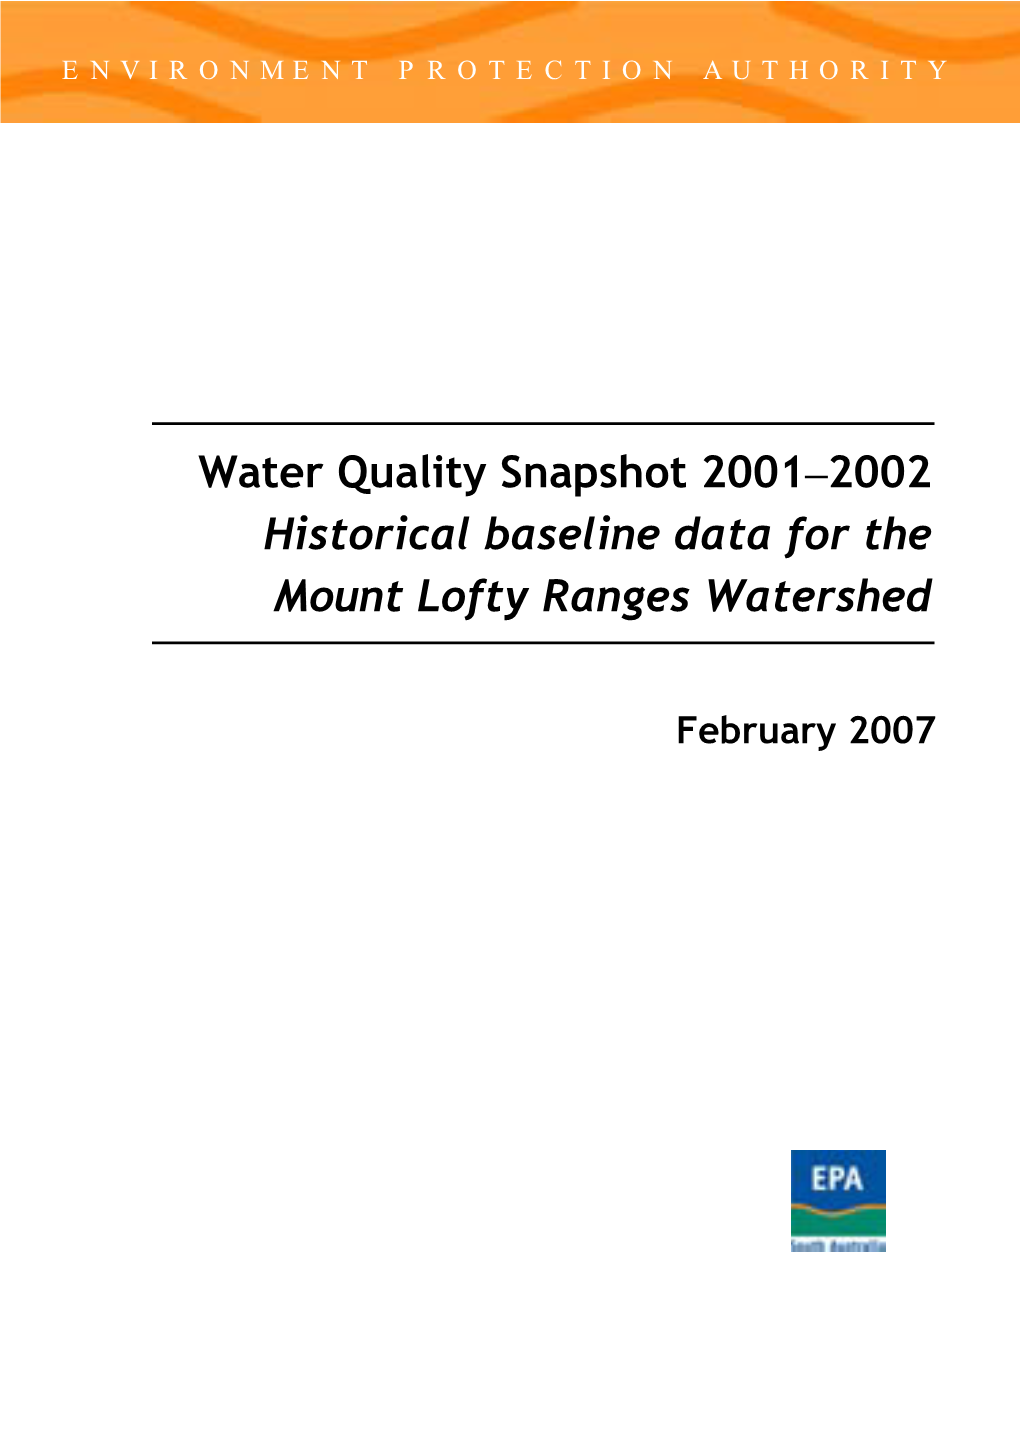 Water Quality Snapshot 2001–2002 Historical Baseline Data for the Mount Lofty Ranges Watershed